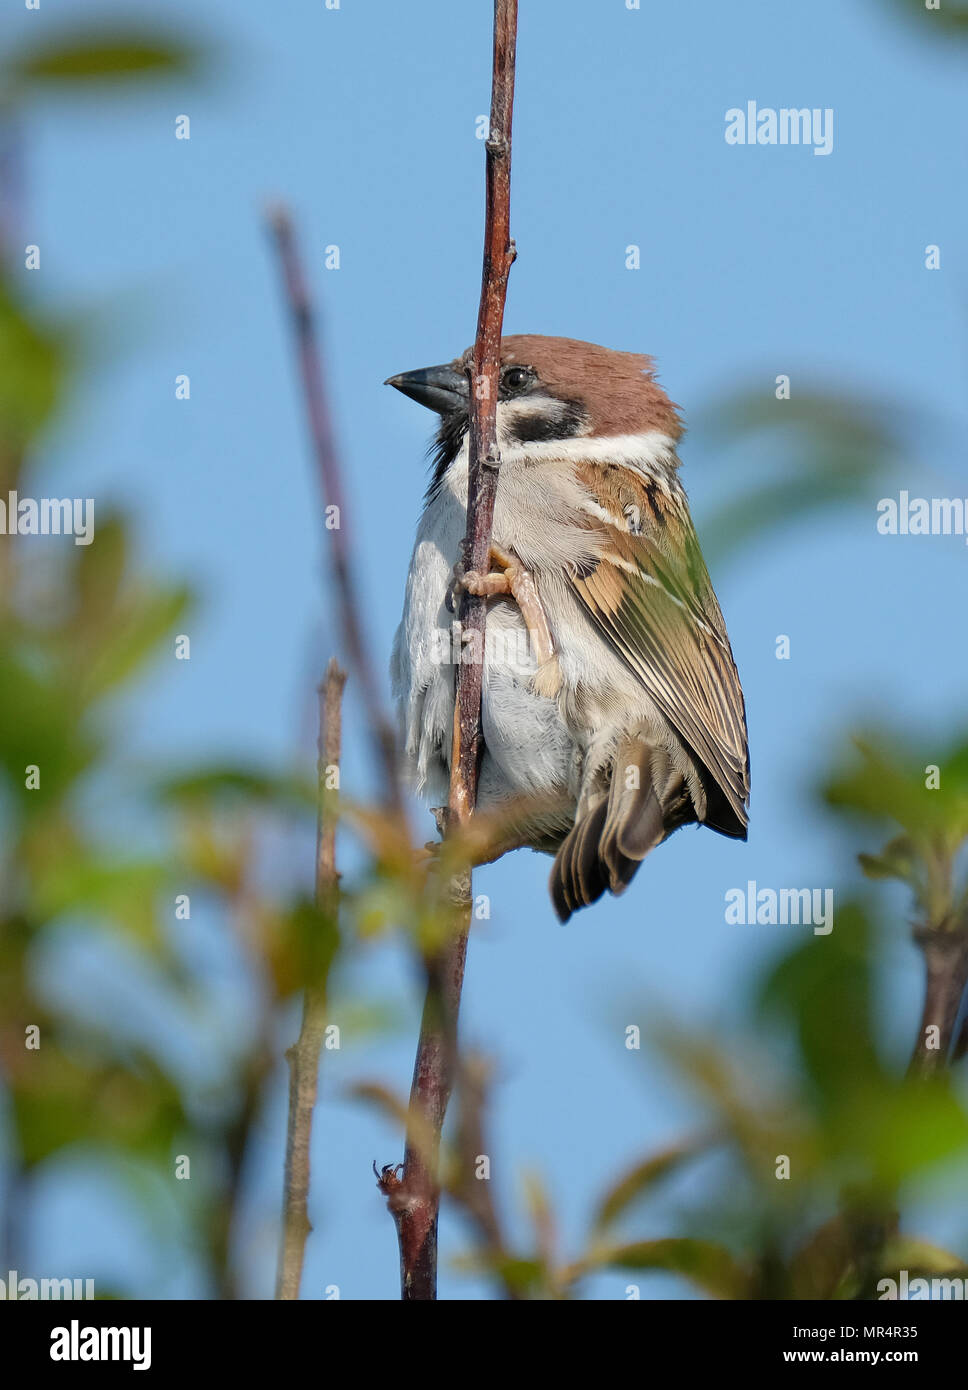 Male House Sparrow in tree in urban house garden. Stock Photo